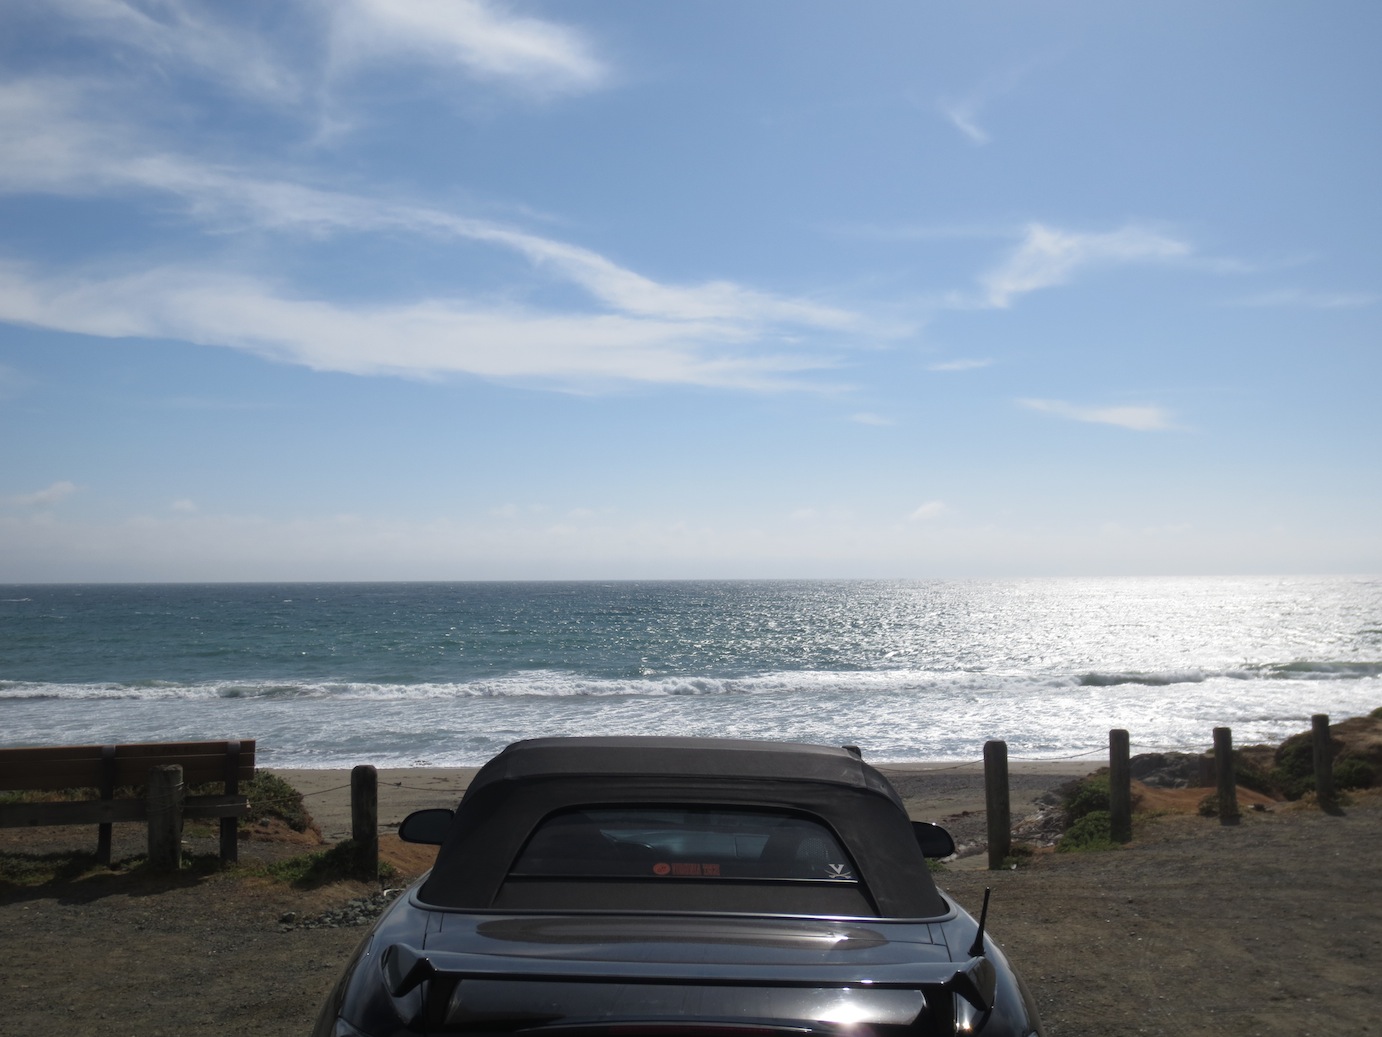 View of the Pacific Ocean from behind my S2000